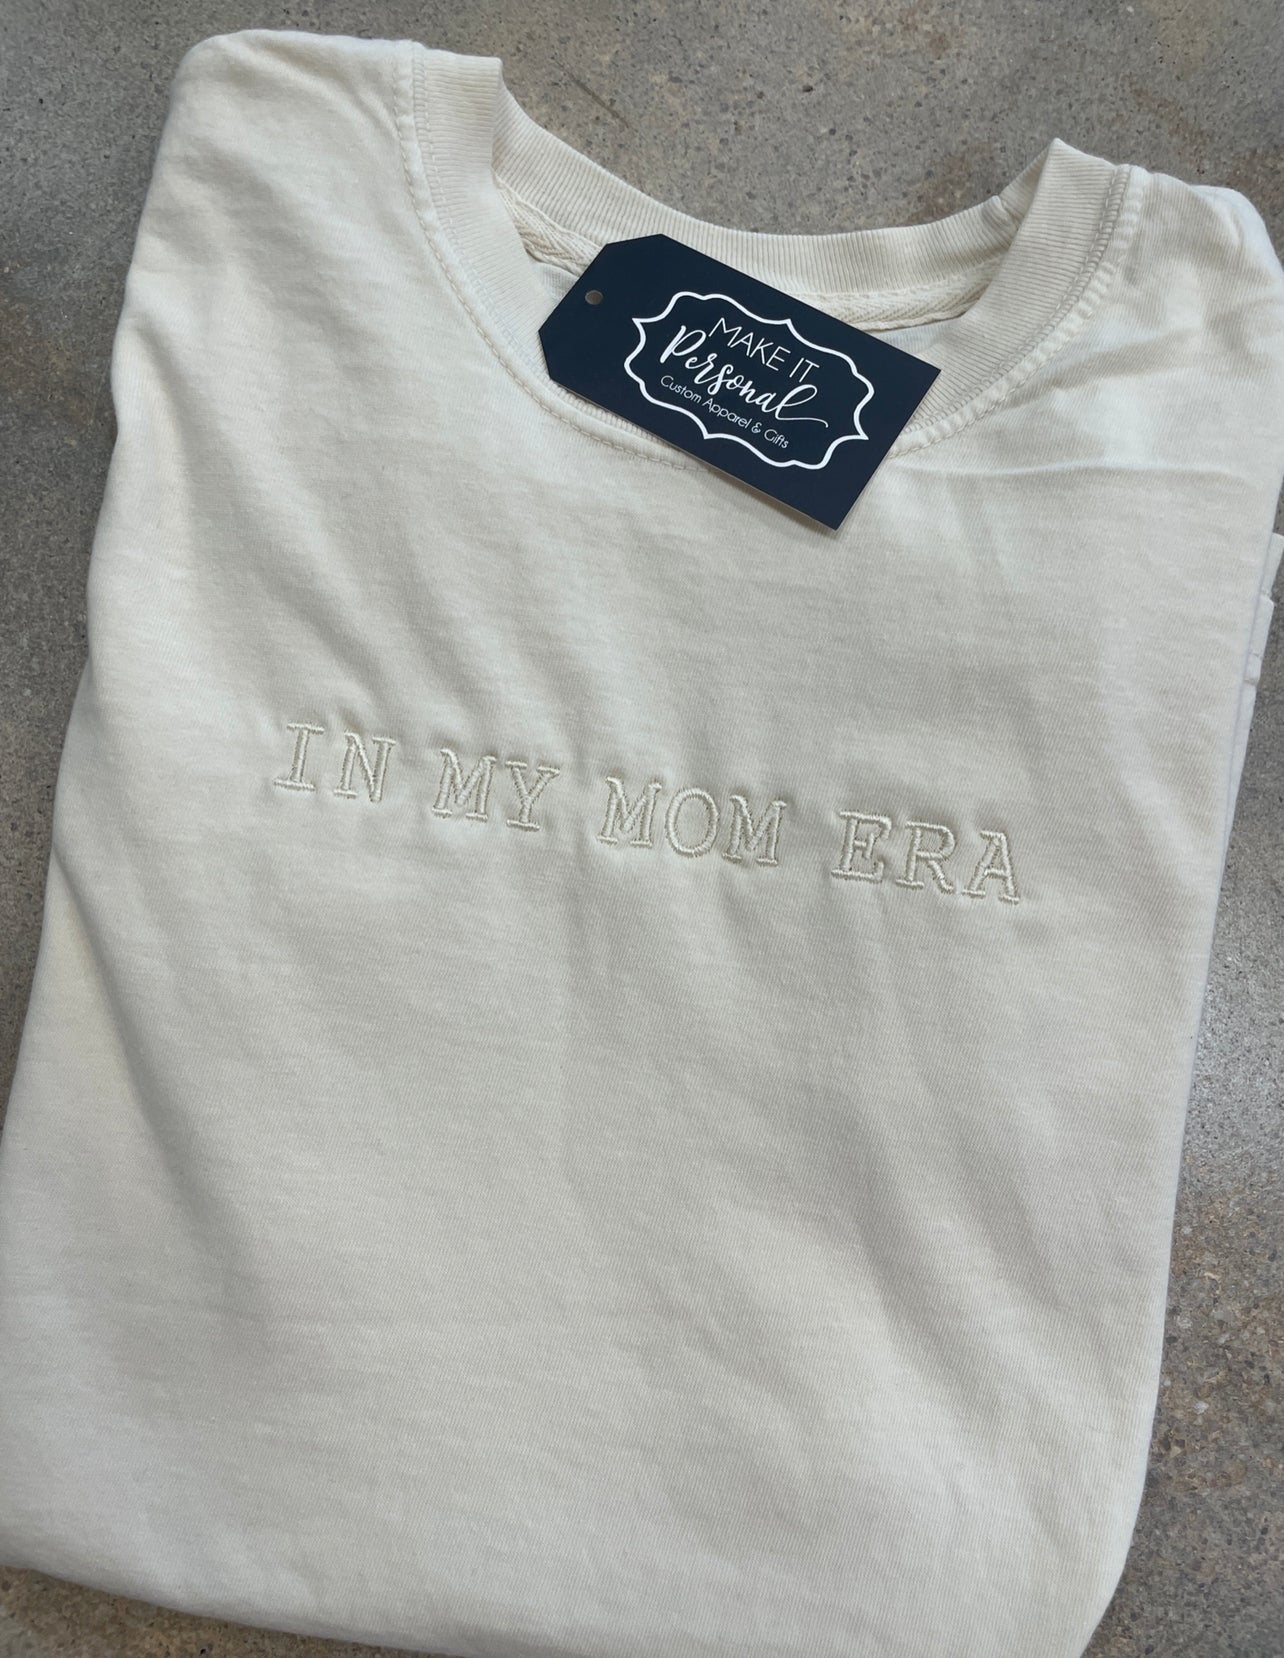 Embroidered "In my era" Tee